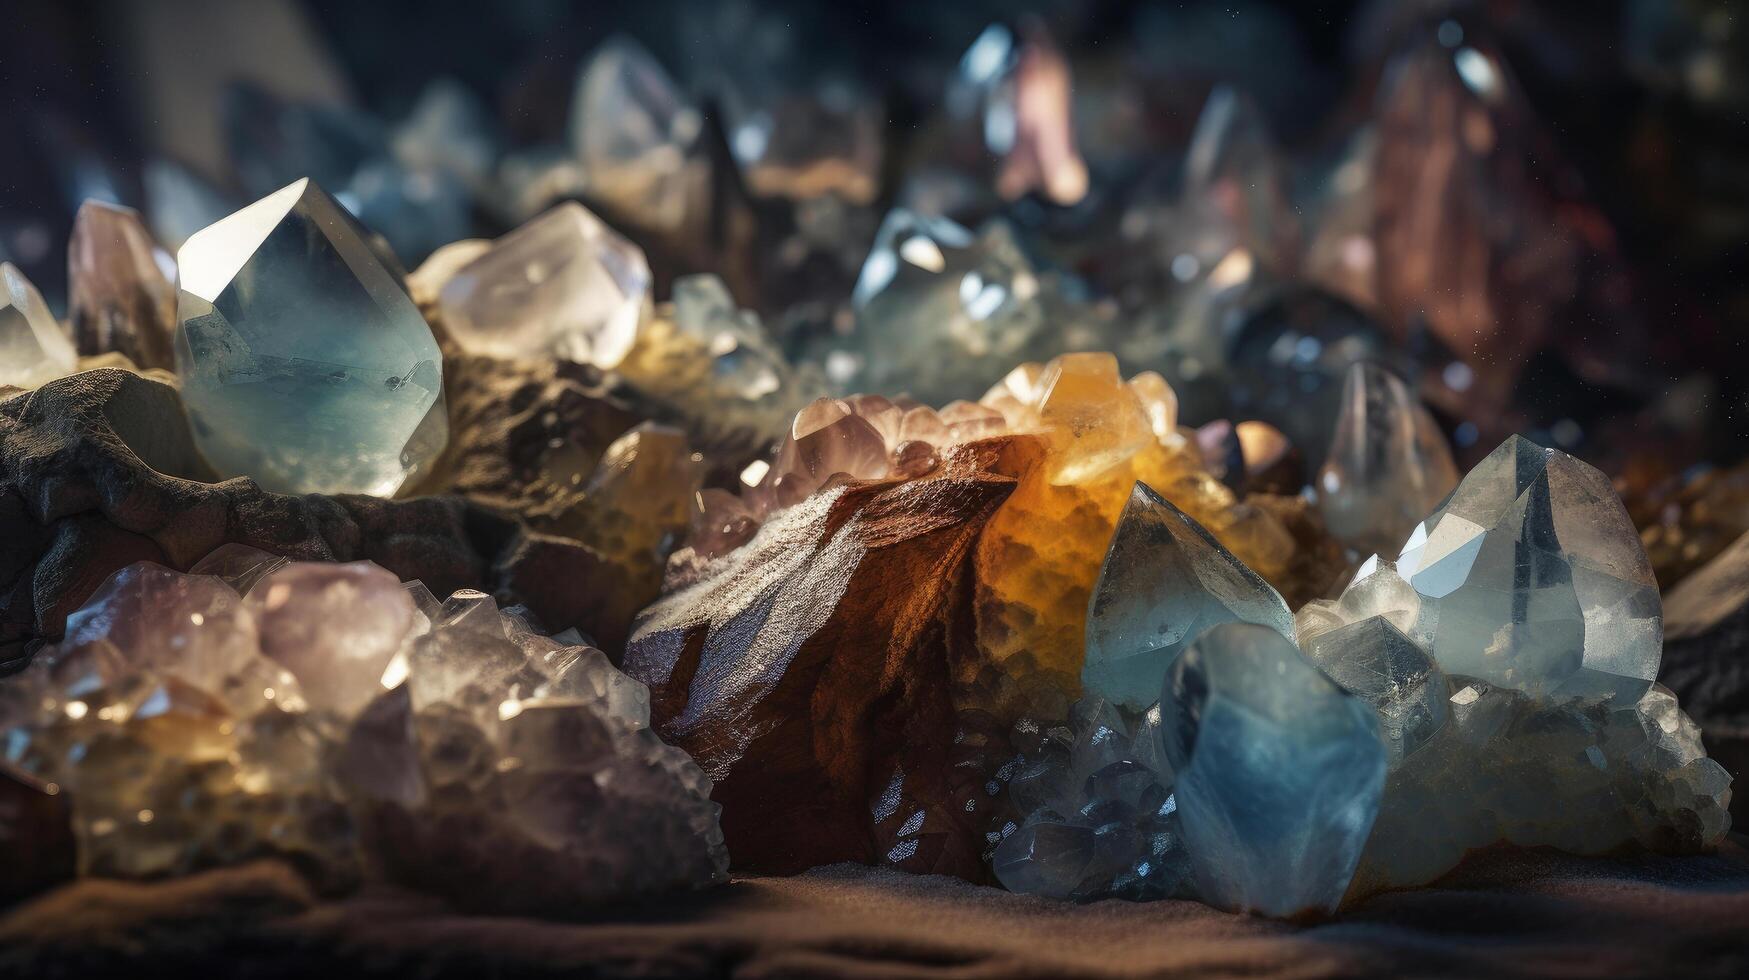 Crystals and minerals. Illustration photo